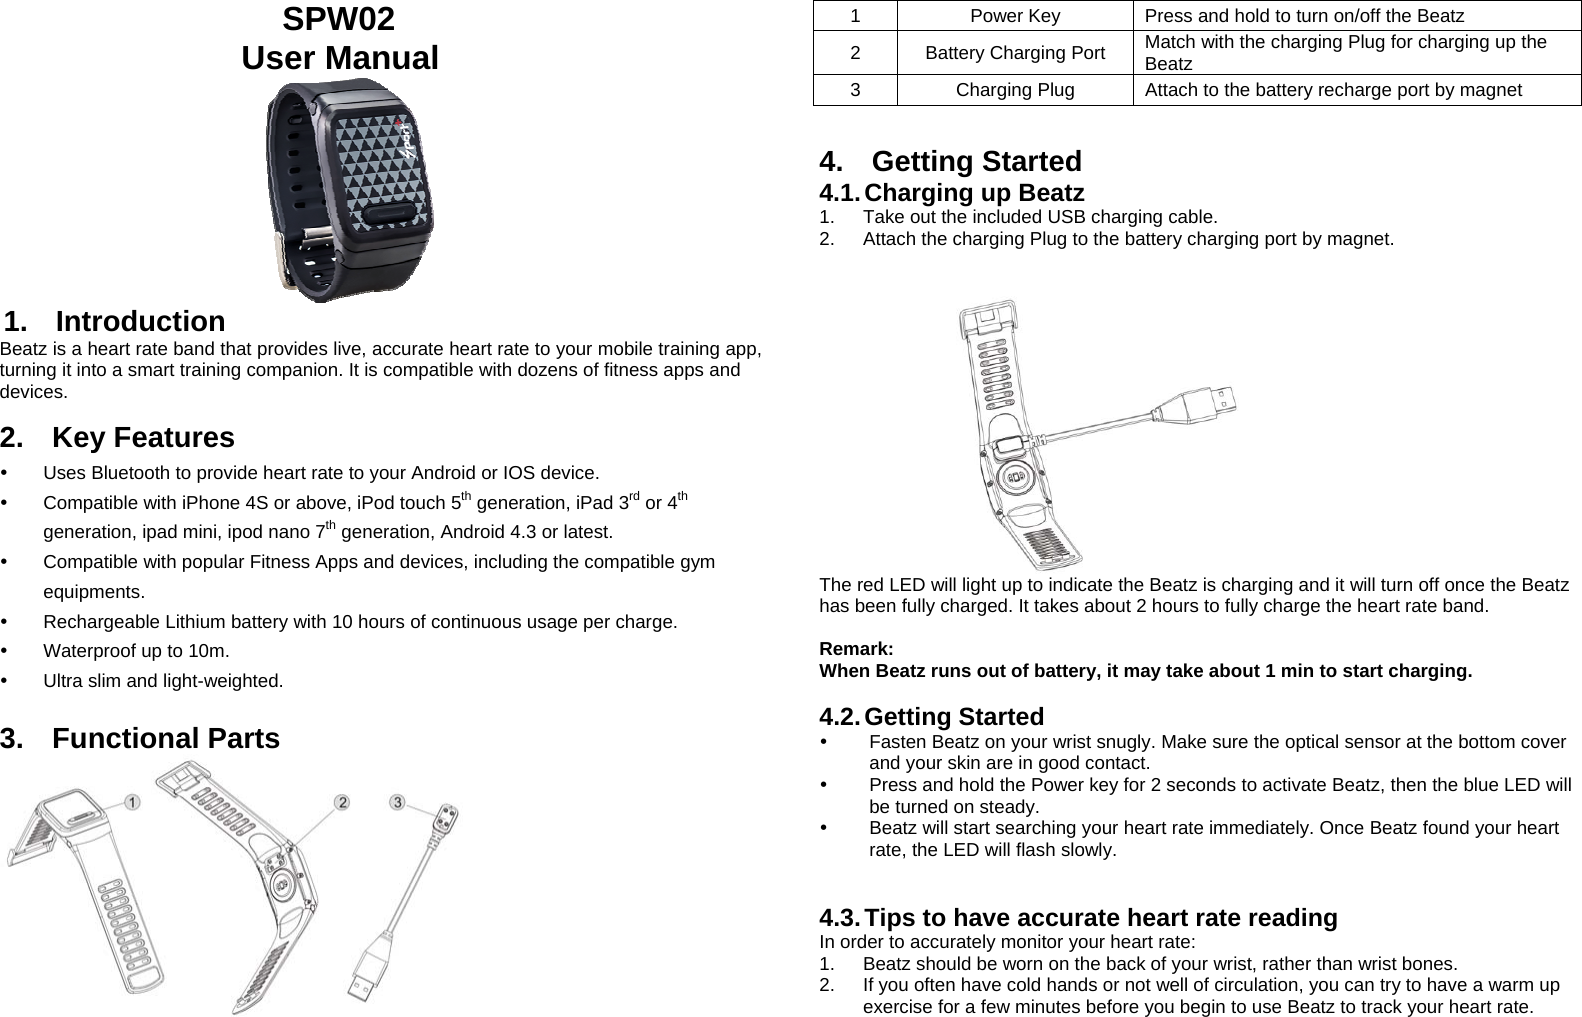 SPW02  User Manual 1. Introduction Beatz is a heart rate band that provides live, accurate heart rate to your mobile training app, turning it into a smart training companion. It is compatible with dozens of fitness apps and devices.  2. Key Features y  Uses Bluetooth to provide heart rate to your Android or IOS device. y  Compatible with iPhone 4S or above, iPod touch 5th generation, iPad 3rd or 4th generation, ipad mini, ipod nano 7th generation, Android 4.3 or latest. y  Compatible with popular Fitness Apps and devices, including the compatible gym equipments. y  Rechargeable Lithium battery with 10 hours of continuous usage per charge.  y  Waterproof up to 10m. y  Ultra slim and light-weighted.  3. Functional Parts 1  Power Key  Press and hold to turn on/off the Beatz 2  Battery Charging Port  Match with the charging Plug for charging up the Beatz  3  Charging Plug  Attach to the battery recharge port by magnet  4. Getting Started 4.1. Charging up Beatz 1.   Take out the included USB charging cable. 2.   Attach the charging Plug to the battery charging port by magnet.  The red LED will light up to indicate the Beatz is charging and it will turn off once the Beatz has been fully charged. It takes about 2 hours to fully charge the heart rate band.   Remark: When Beatz runs out of battery, it may take about 1 min to start charging. 4.2. Getting  Started y  Fasten Beatz on your wrist snugly. Make sure the optical sensor at the bottom cover and your skin are in good contact. y  Press and hold the Power key for 2 seconds to activate Beatz, then the blue LED will be turned on steady. y  Beatz will start searching your heart rate immediately. Once Beatz found your heart rate, the LED will flash slowly.  4.3. Tips to have accurate heart rate reading In order to accurately monitor your heart rate: 1.   Beatz should be worn on the back of your wrist, rather than wrist bones. 2.   If you often have cold hands or not well of circulation, you can try to have a warm up exercise for a few minutes before you begin to use Beatz to track your heart rate. 